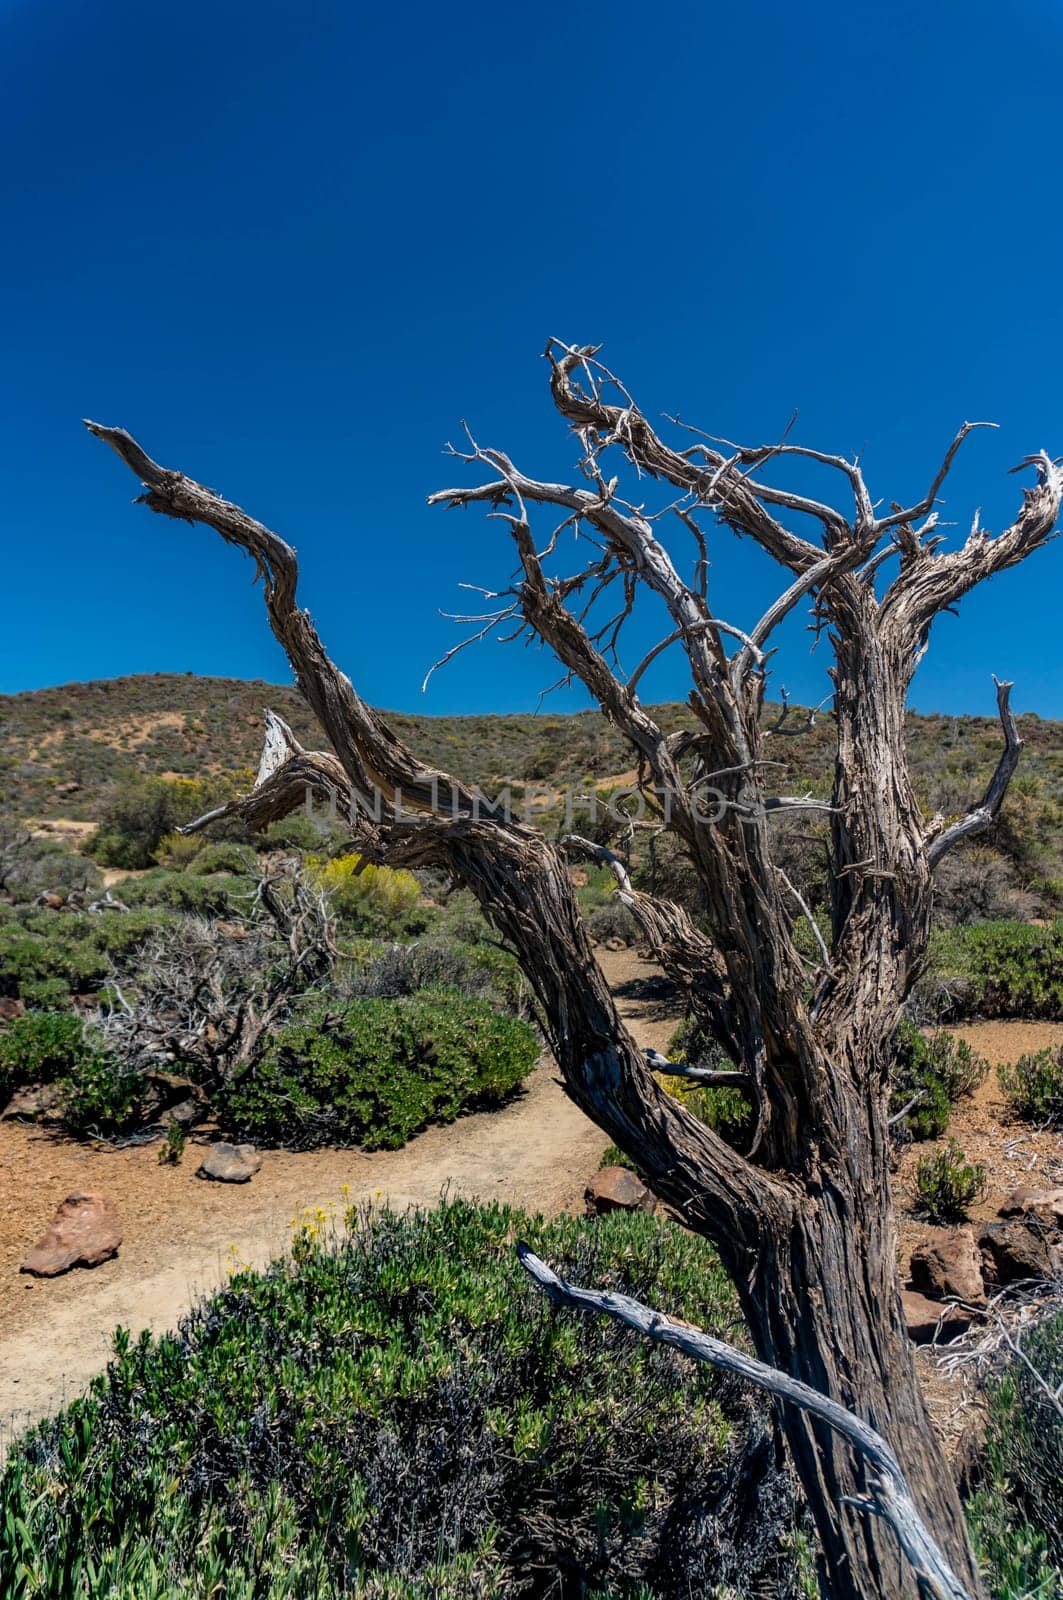 Dead tree with naked branches on blue sky background in a desert by amovitania